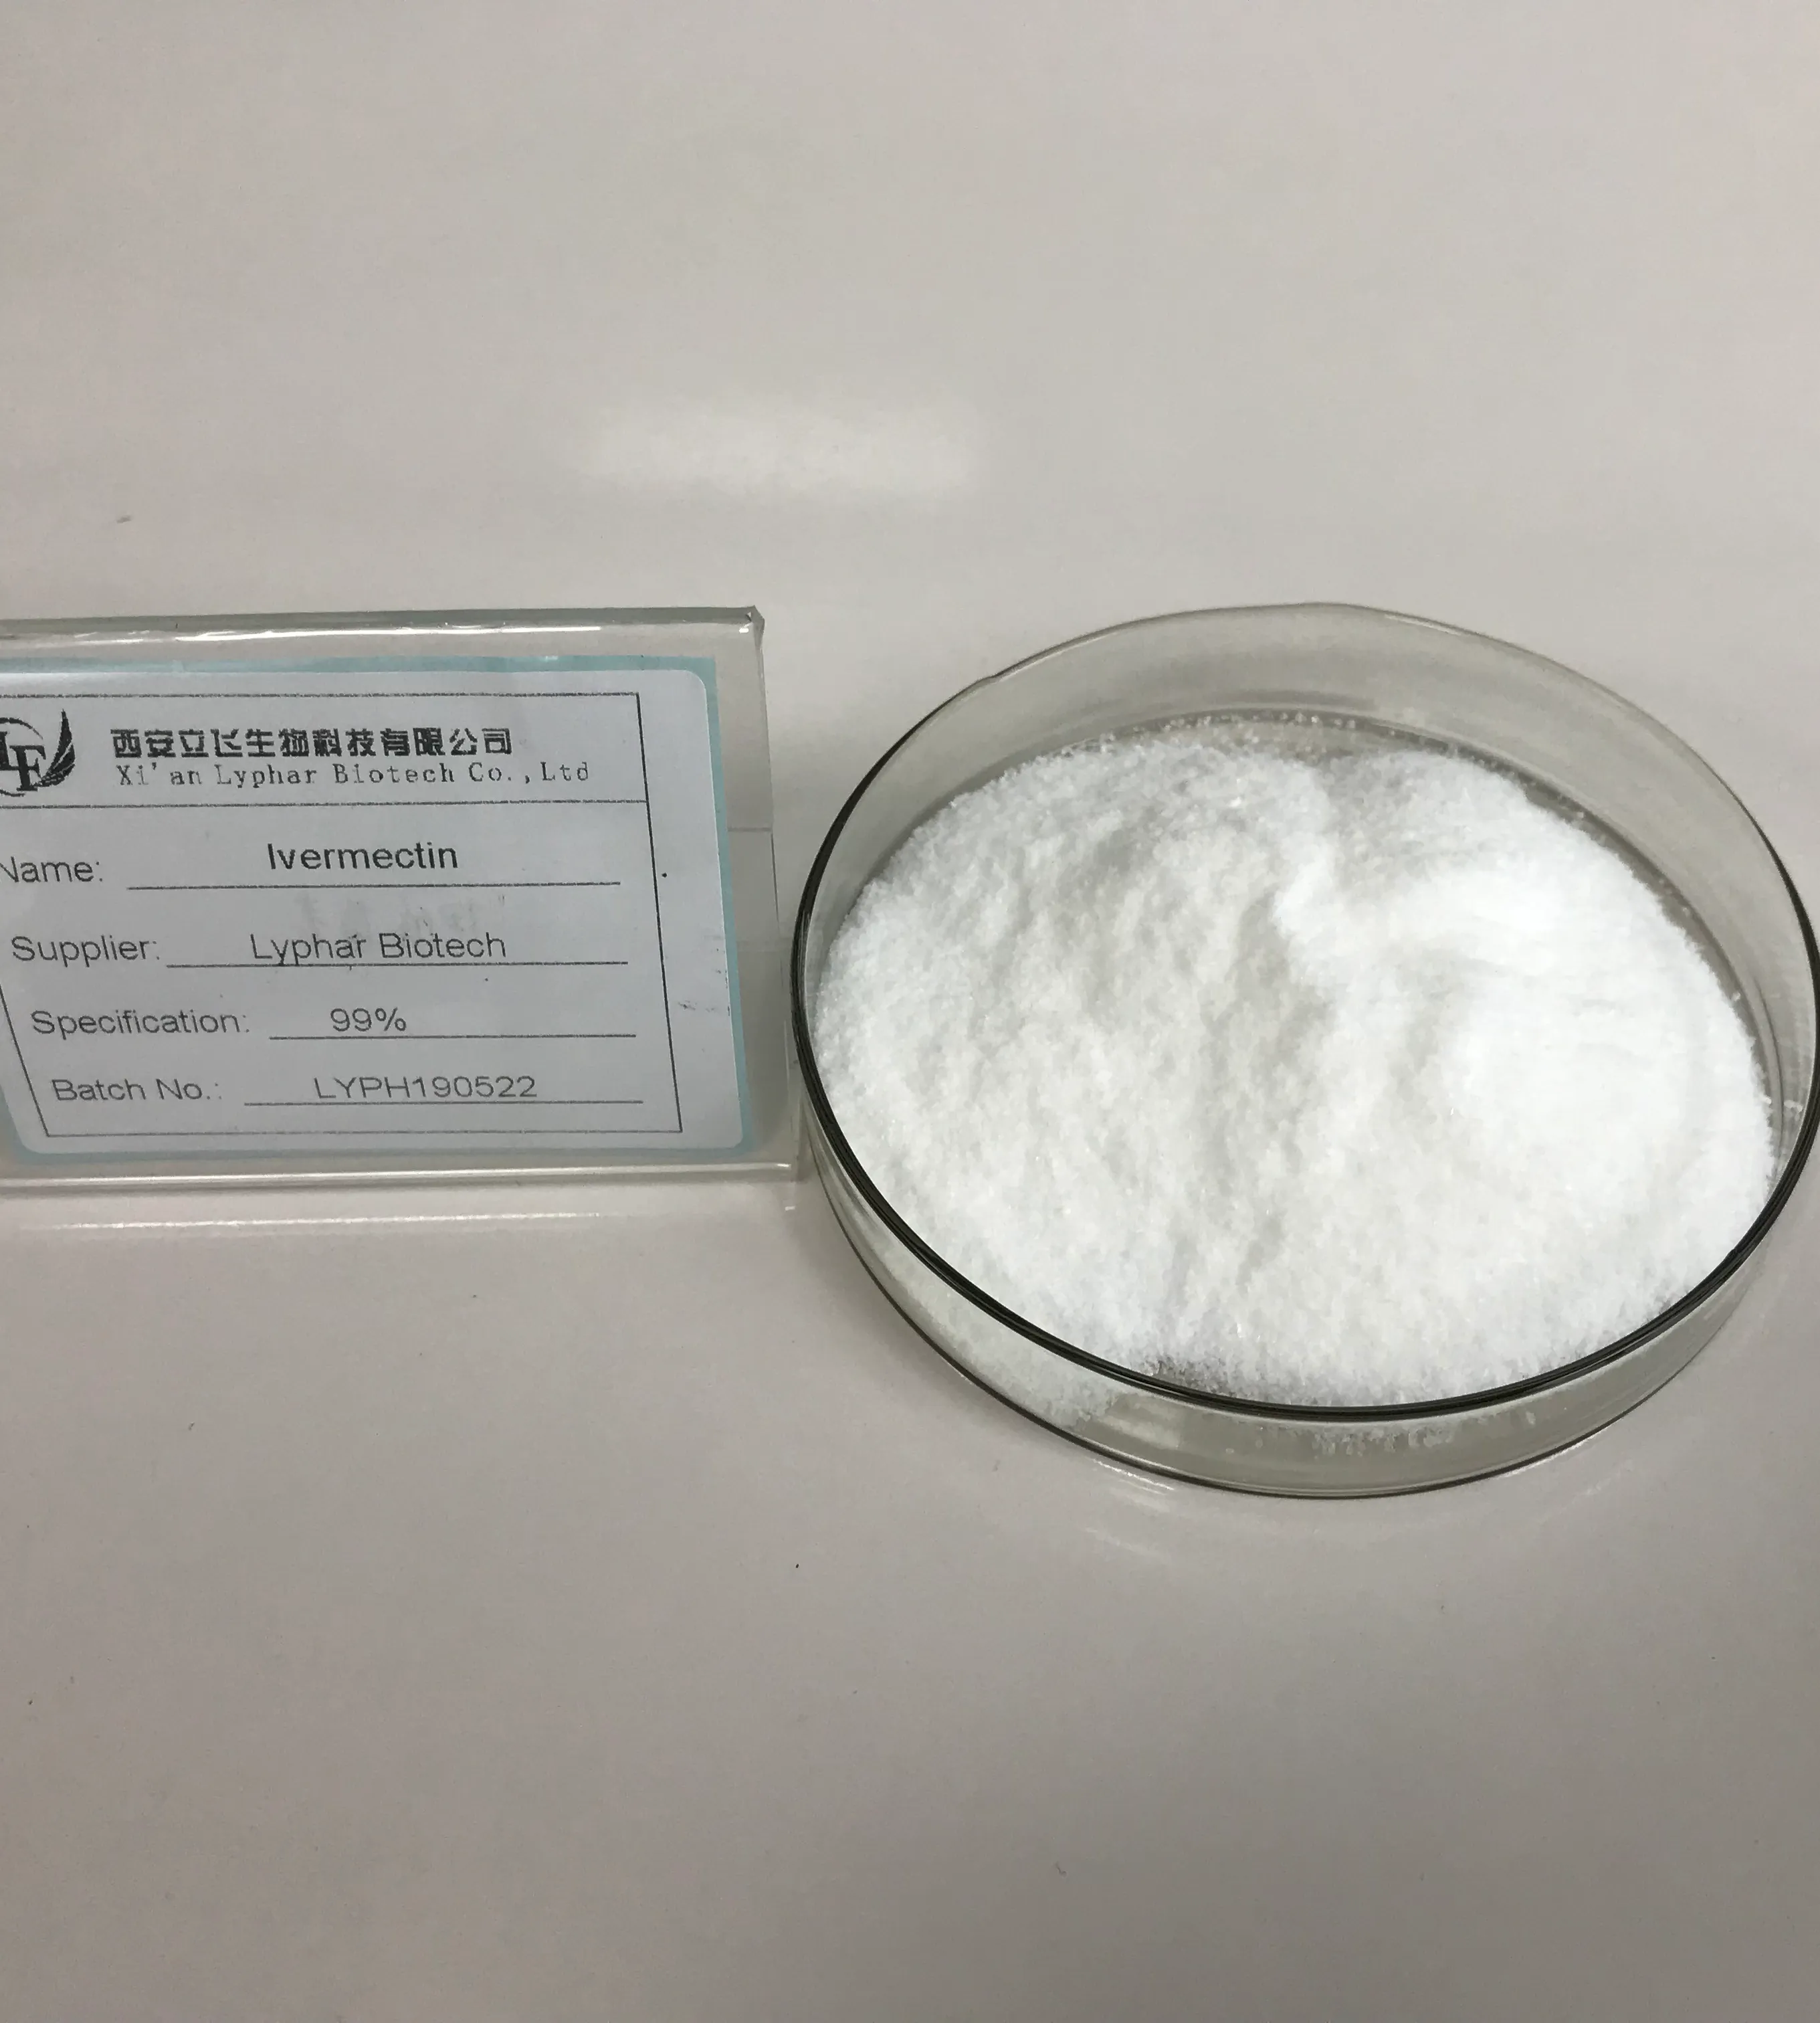 Do you know what ivermectin powder is